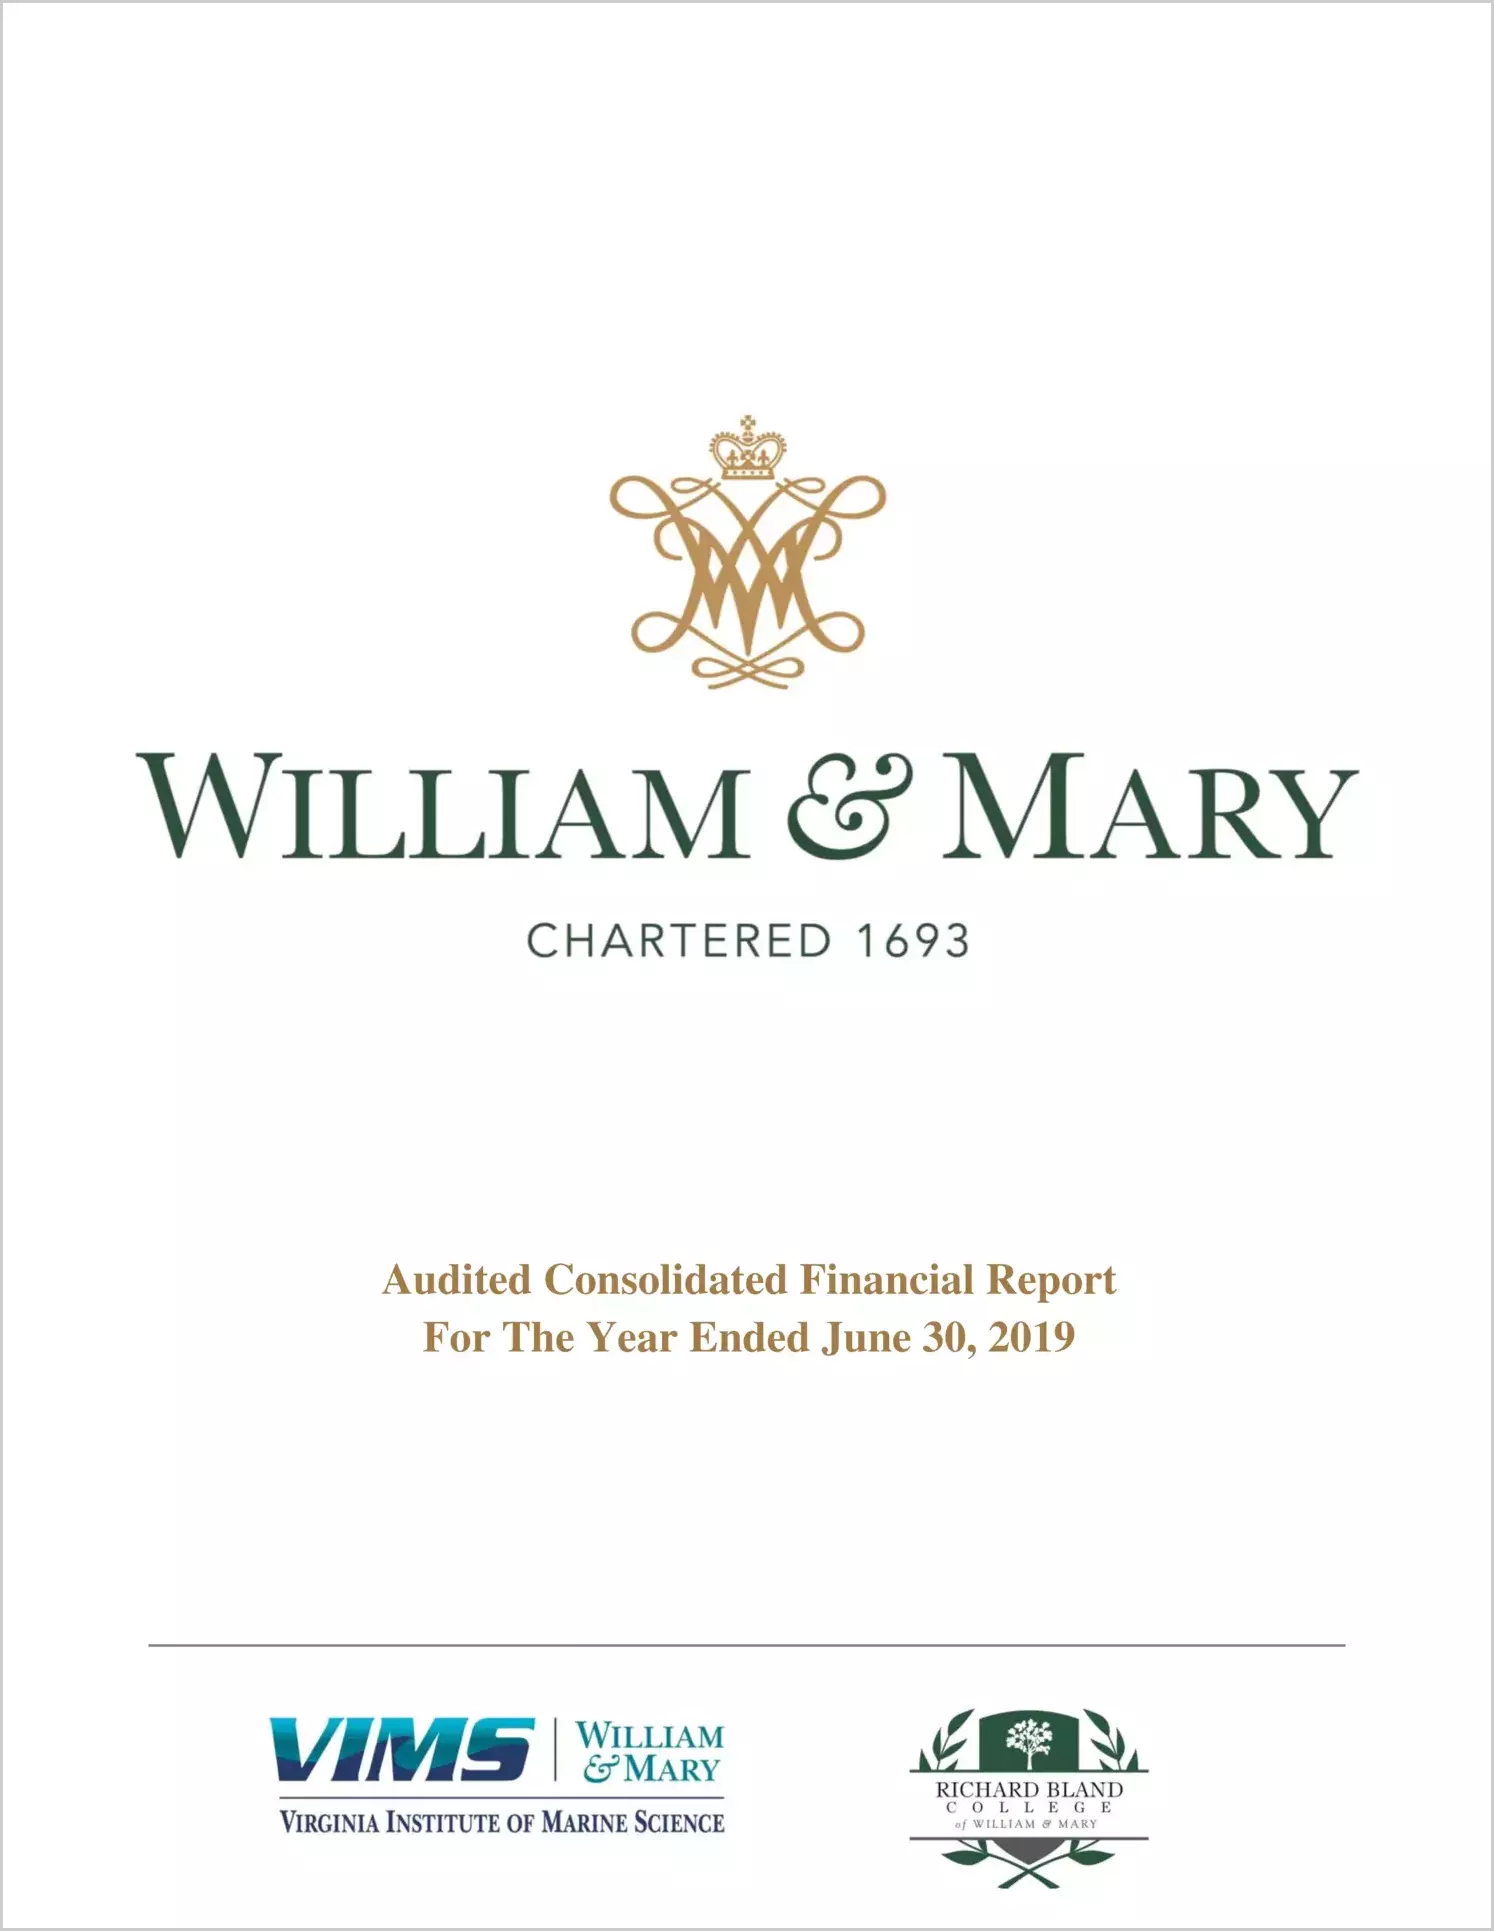 William & Mary, Virginia Institute of Marine Science, and Richard Bland College Financial Statements for the year ended June 30, 2019